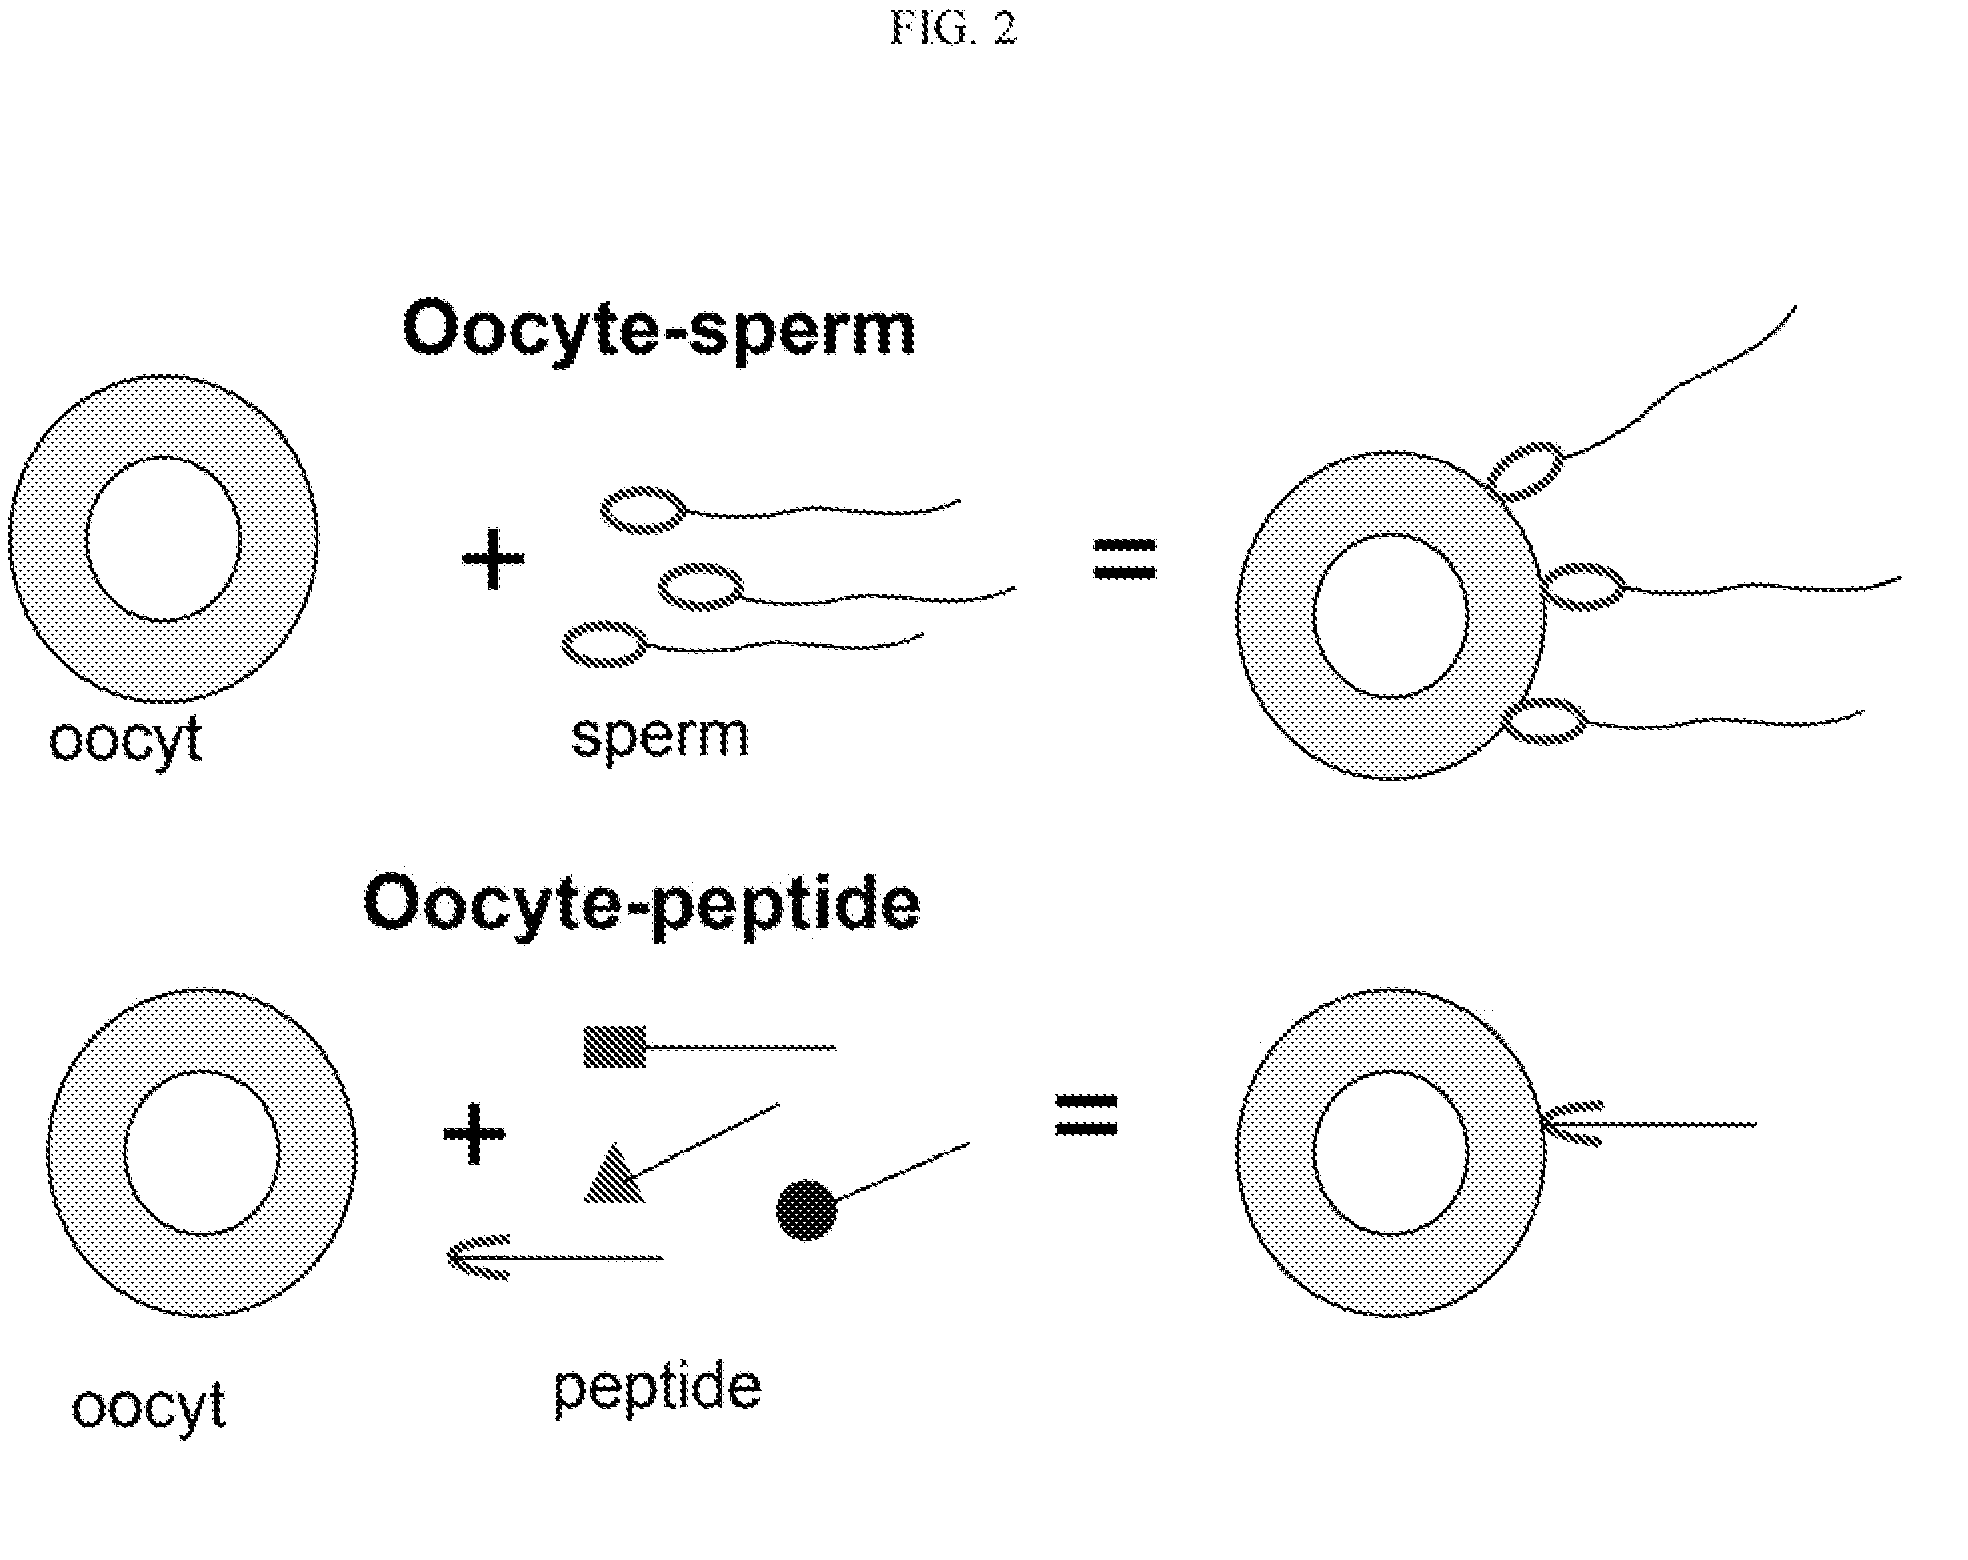 Methods, Compositions, and Sequences of ZP-Binding Peptides for Immunocontraception of Dogs and Other Animals